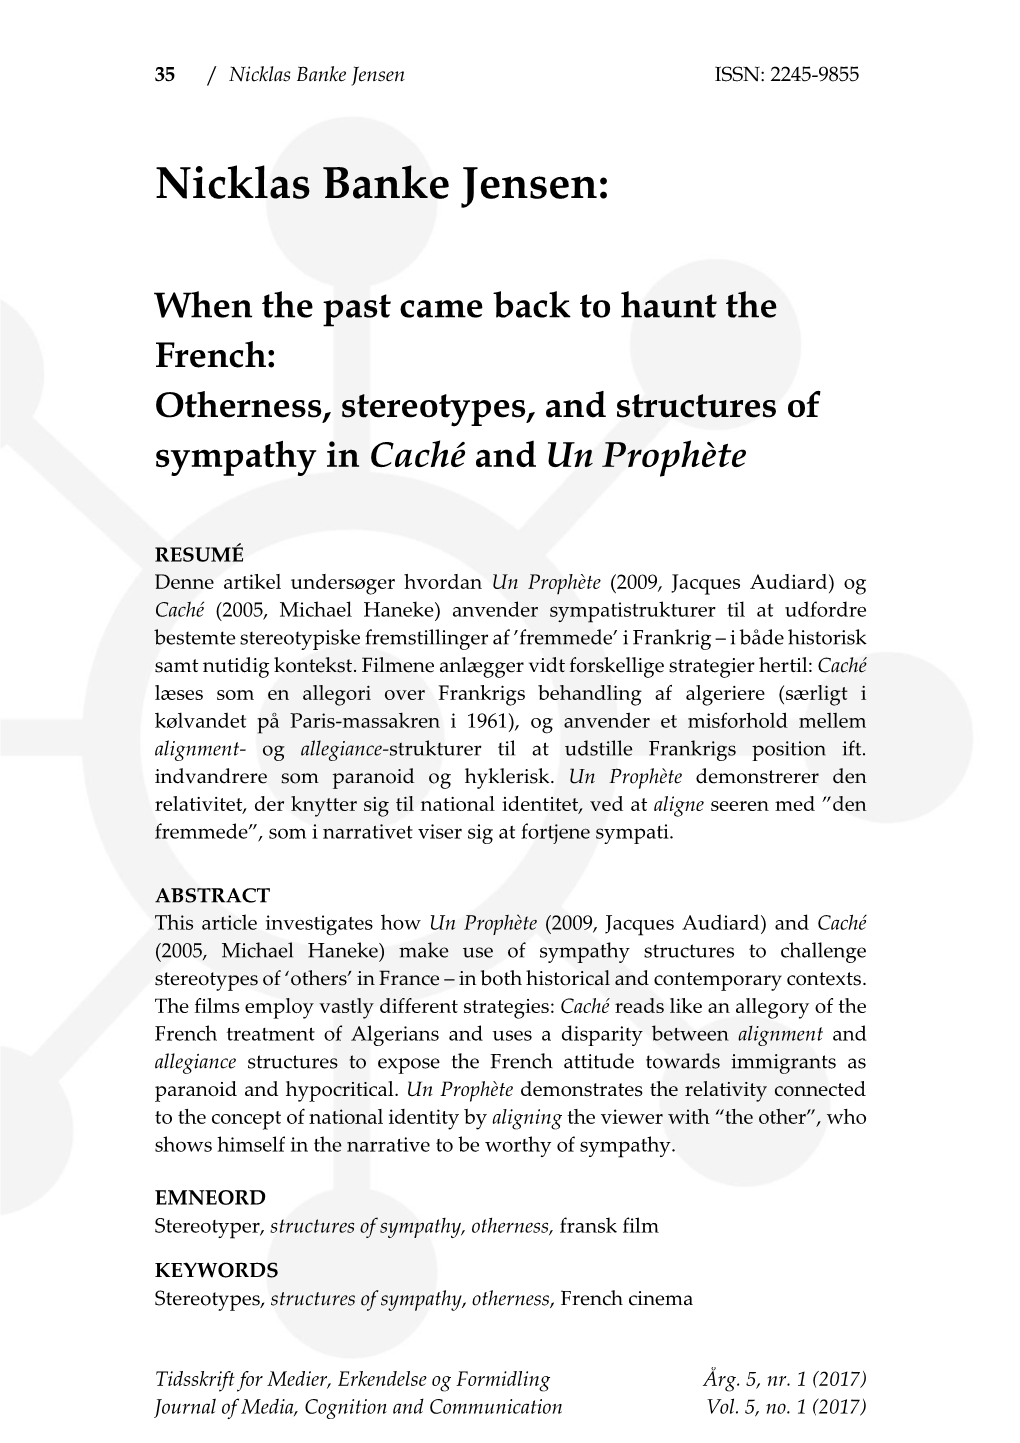 Nicklas Banke Jensen: When the Past Came Back to Haunt the French: Otherness, Stereotypes, and Structures of Sympathy in Caché and Un Prophète